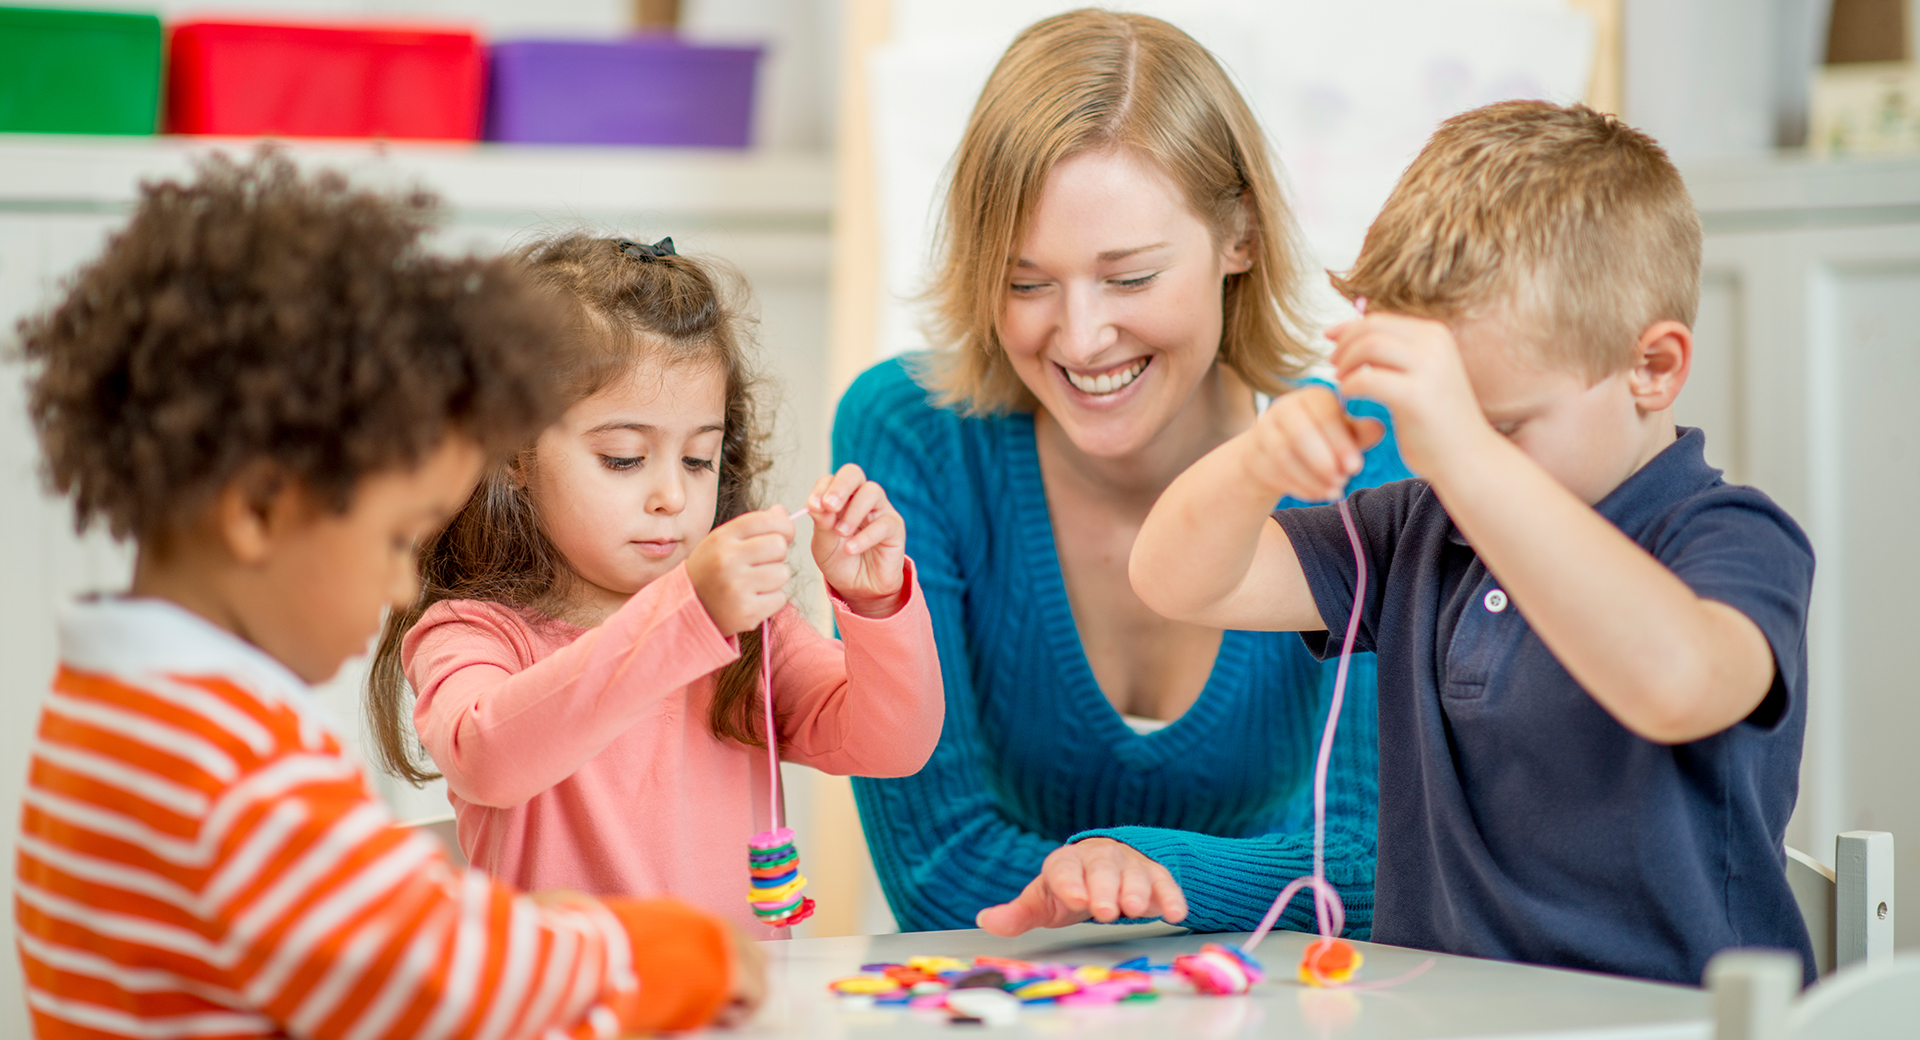 Partner With the Best for Child Care Courses